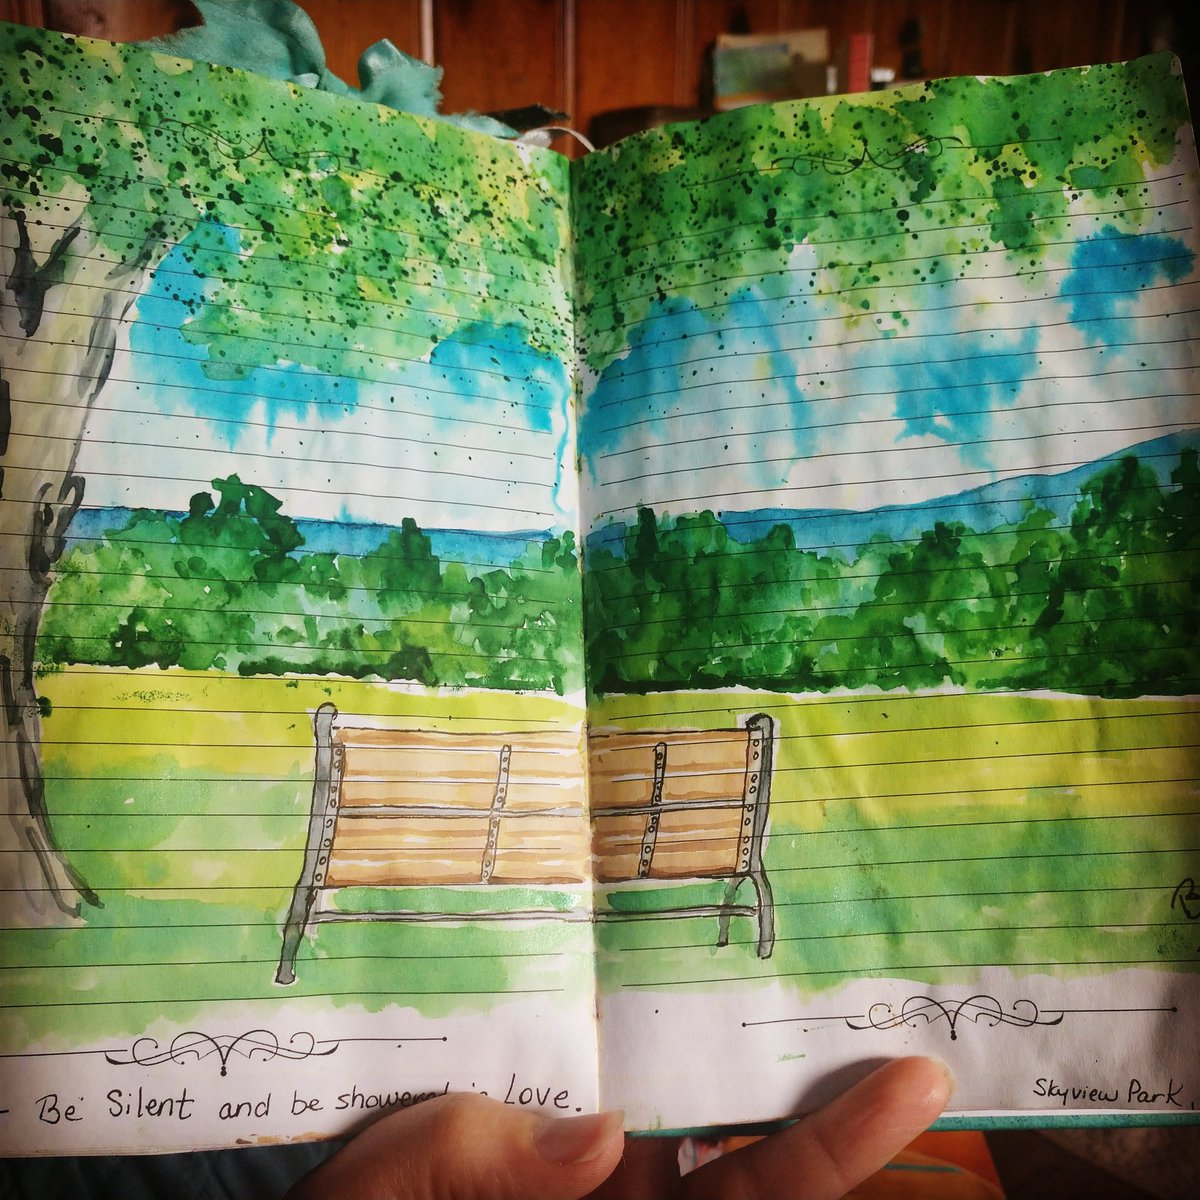 One of my fav journal pgs SkyView Park is a lovely place to sit & reflect, but so is my couch early in the morning while the house is still quite.
Be silent & showered in love❣️
HAVE A BEAUTIFUL DAY😎
#meditation #connectedtosource #journalart #journaladdict #bytheladylaughsalot